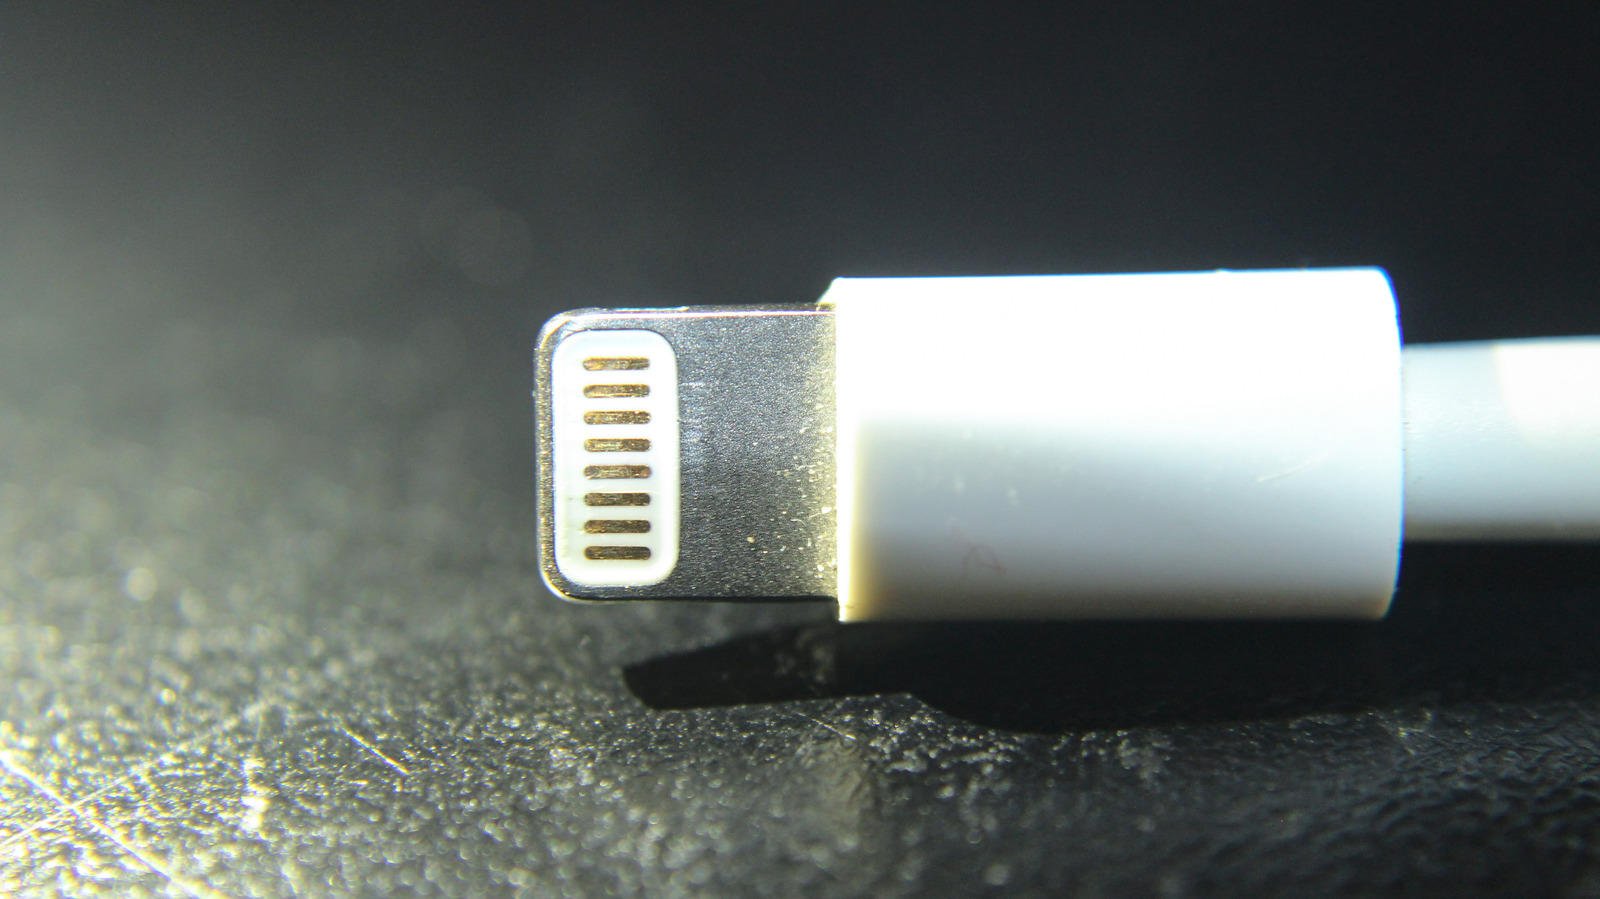 Lightning cable